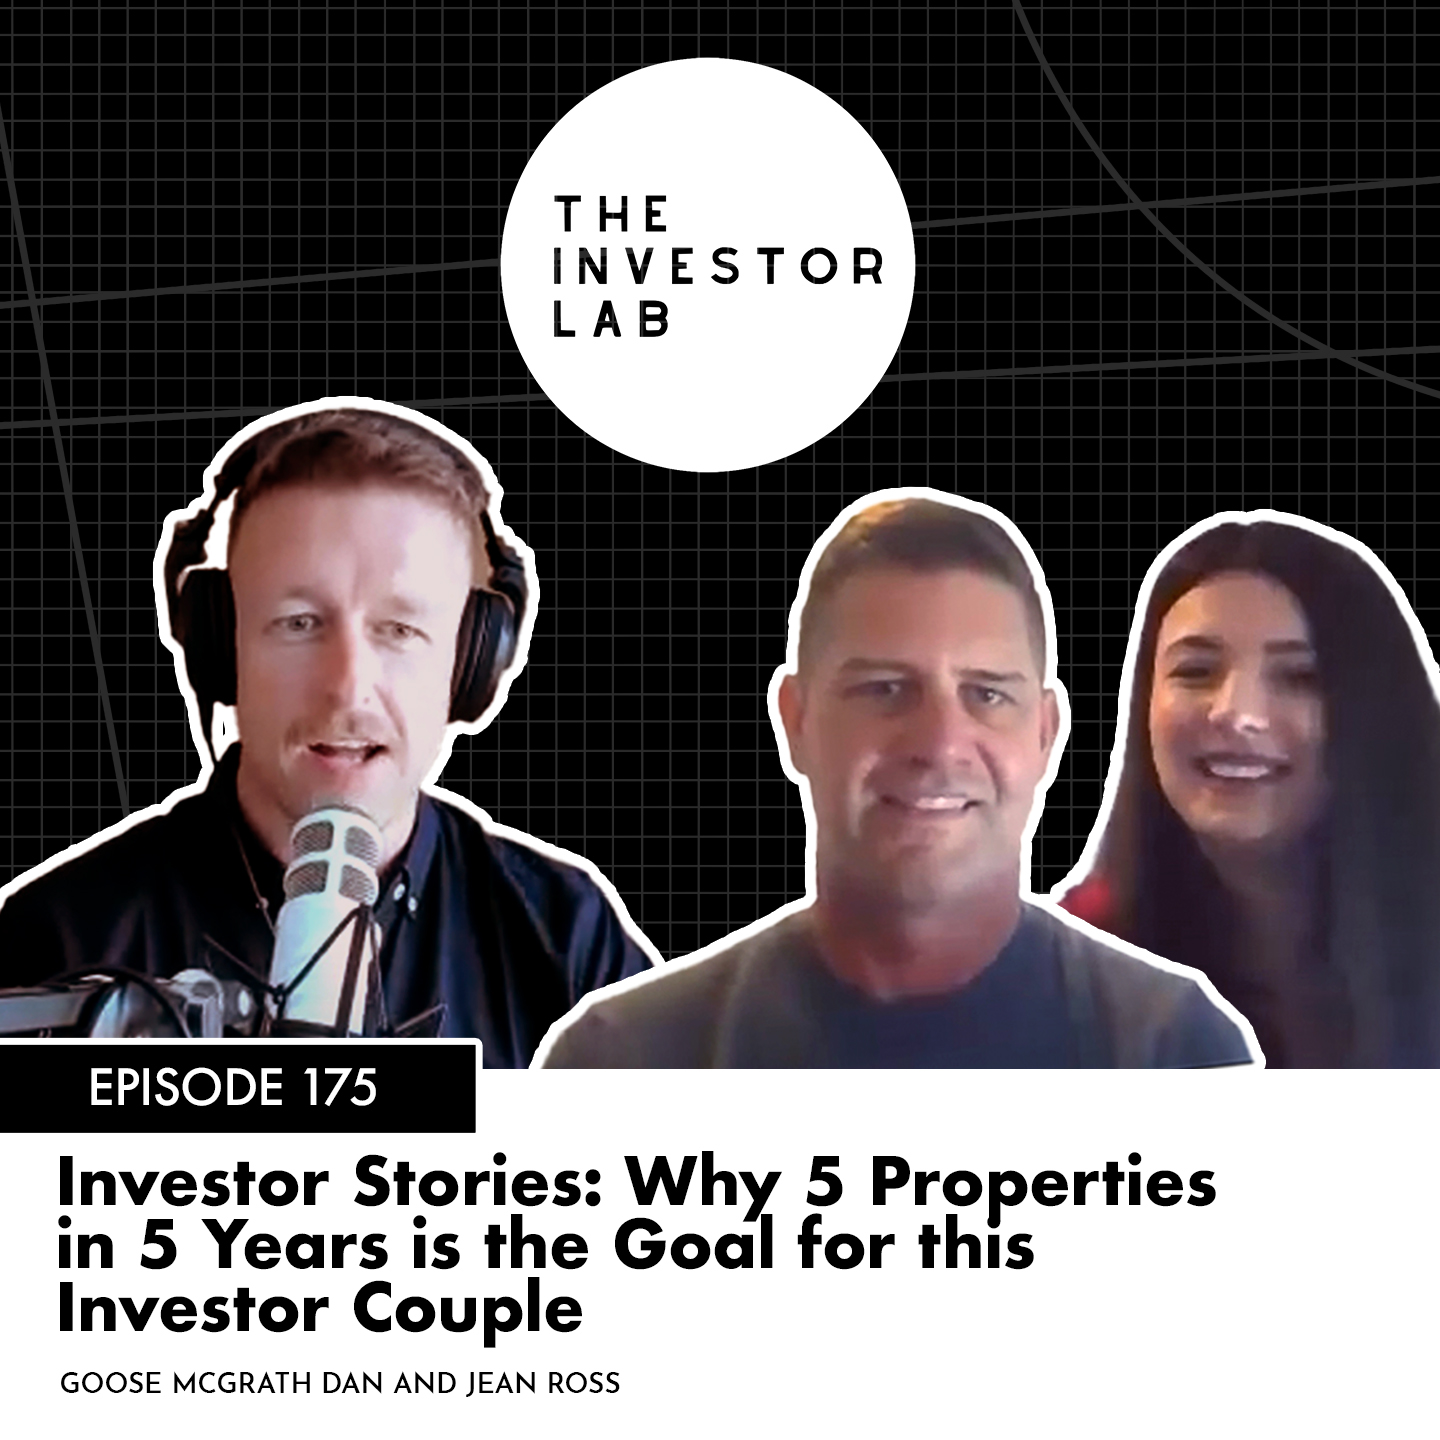 Investor Stories: Why 5 Properties in 5 Years is the Goal for this Investor Couple